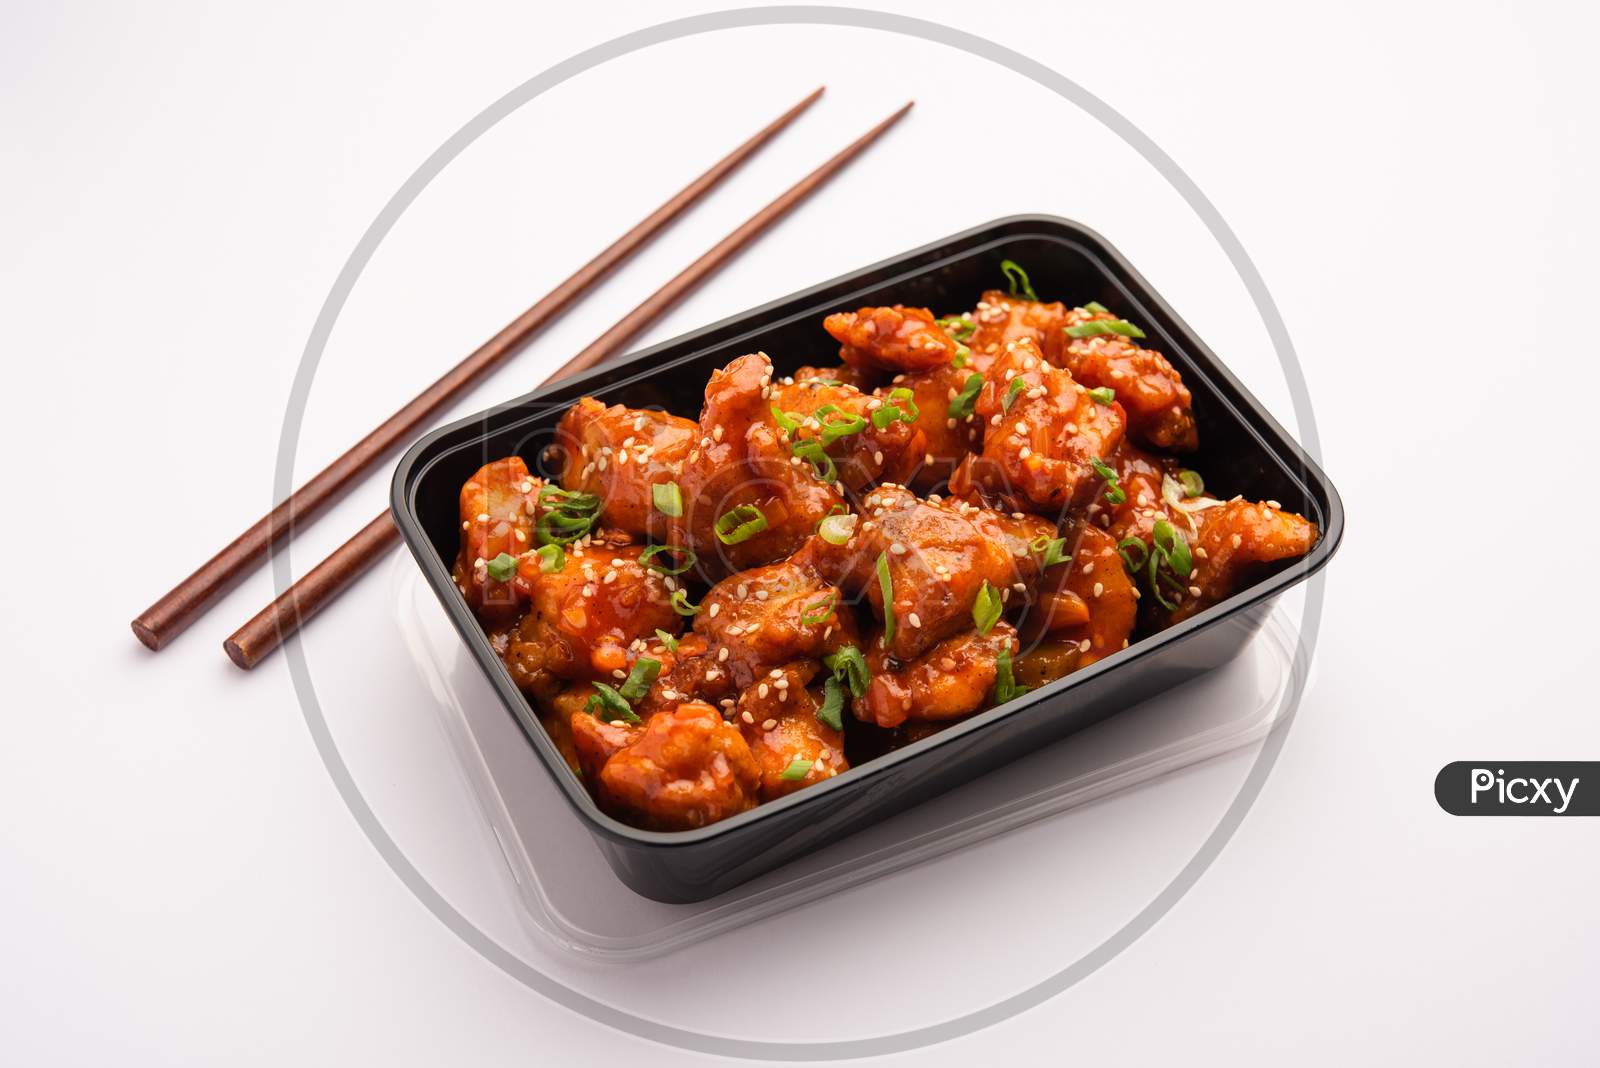 Online Food Delivery Concept In India - Tasty Chilli Chicken Packed In A Black Plastic Box